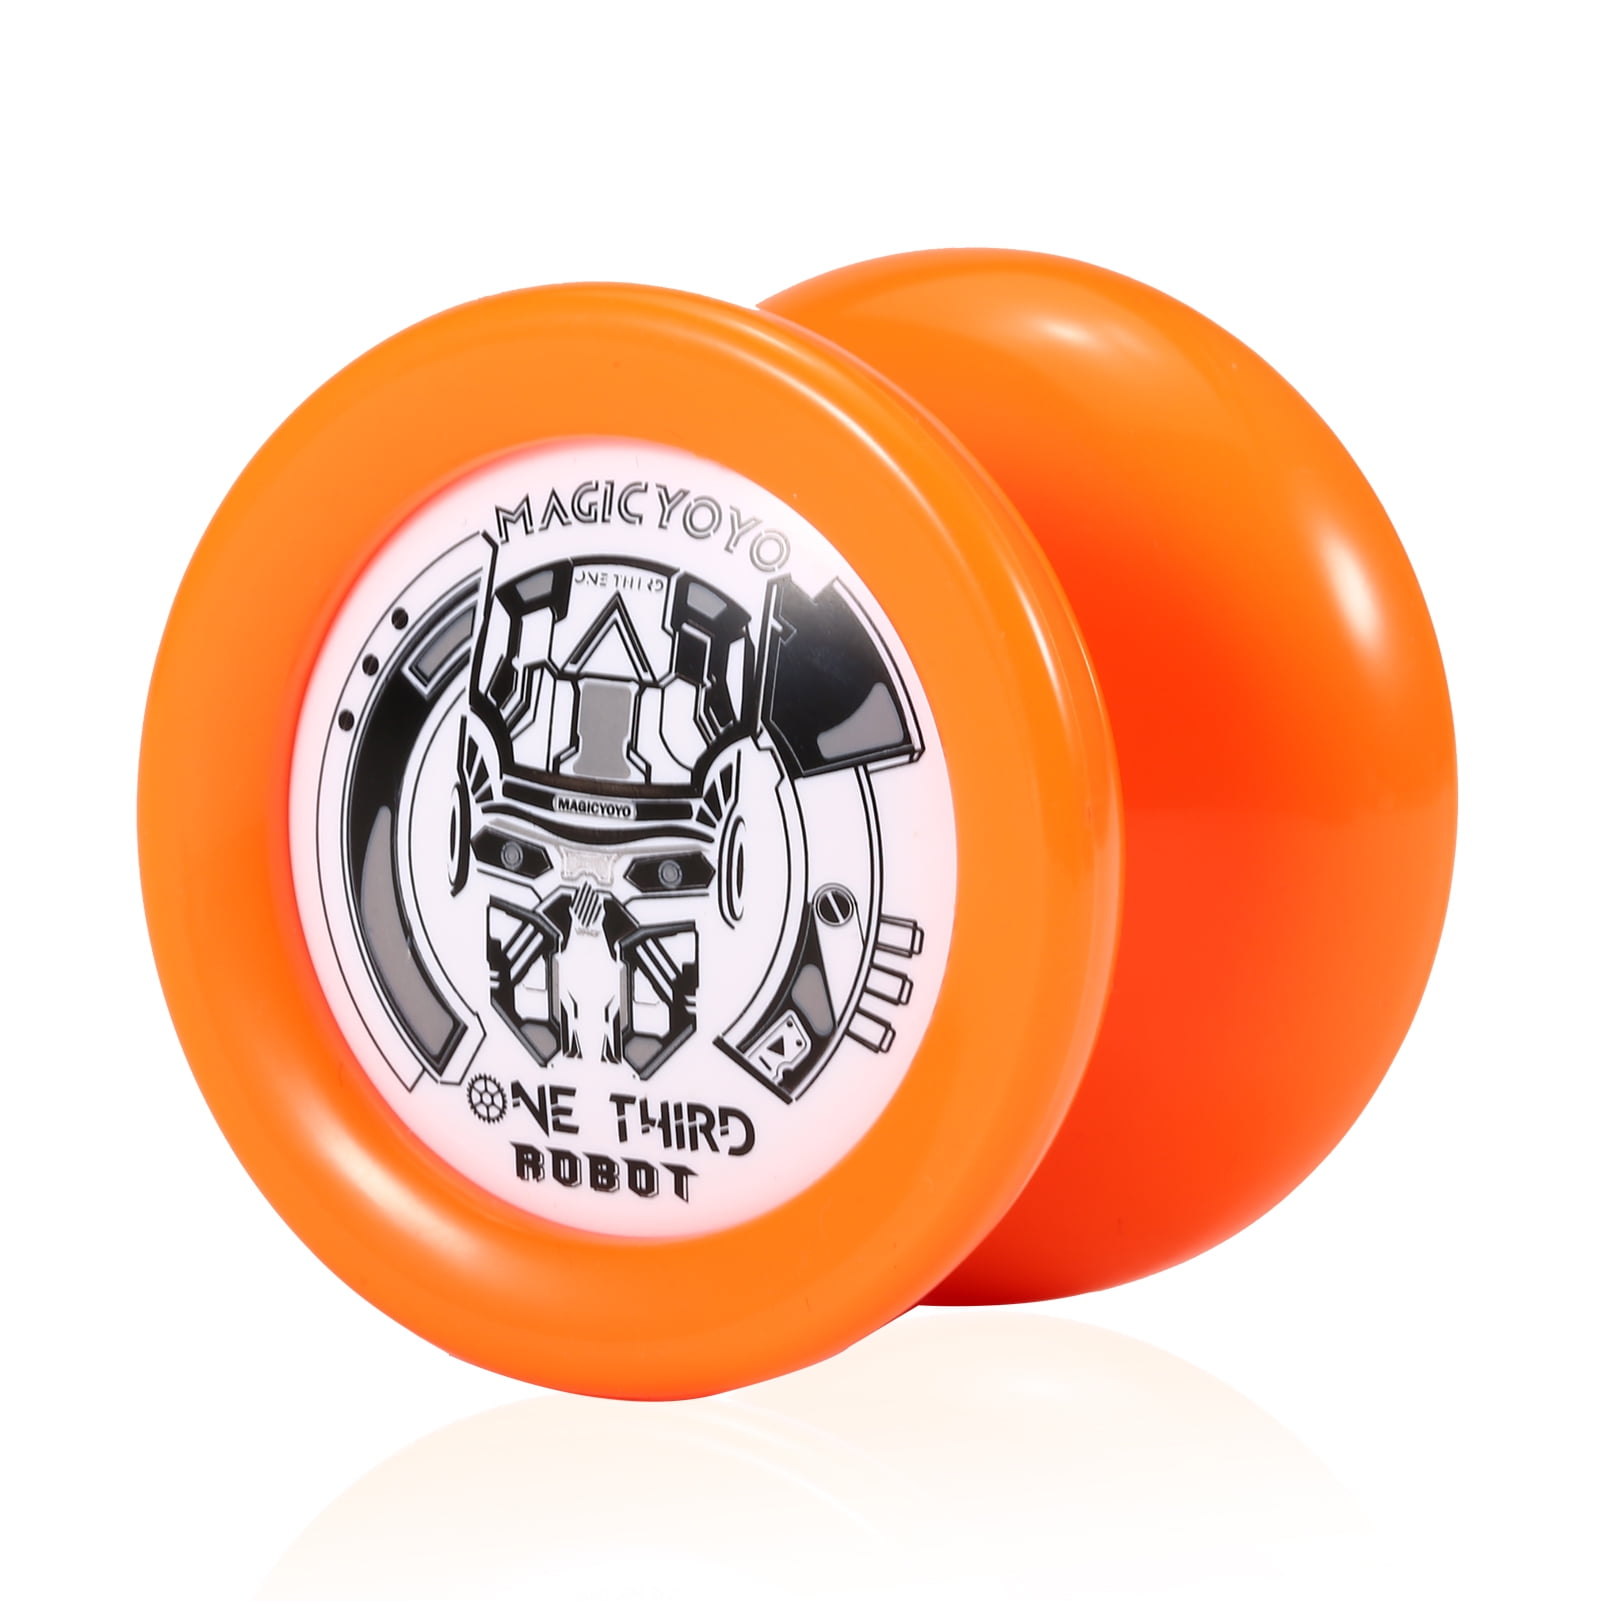 D2 Professional Yoyo Bearing Lightweighted Yoyo for Amateurs Beginners Professional Gift Toy for Kids Boys - Walmart.com